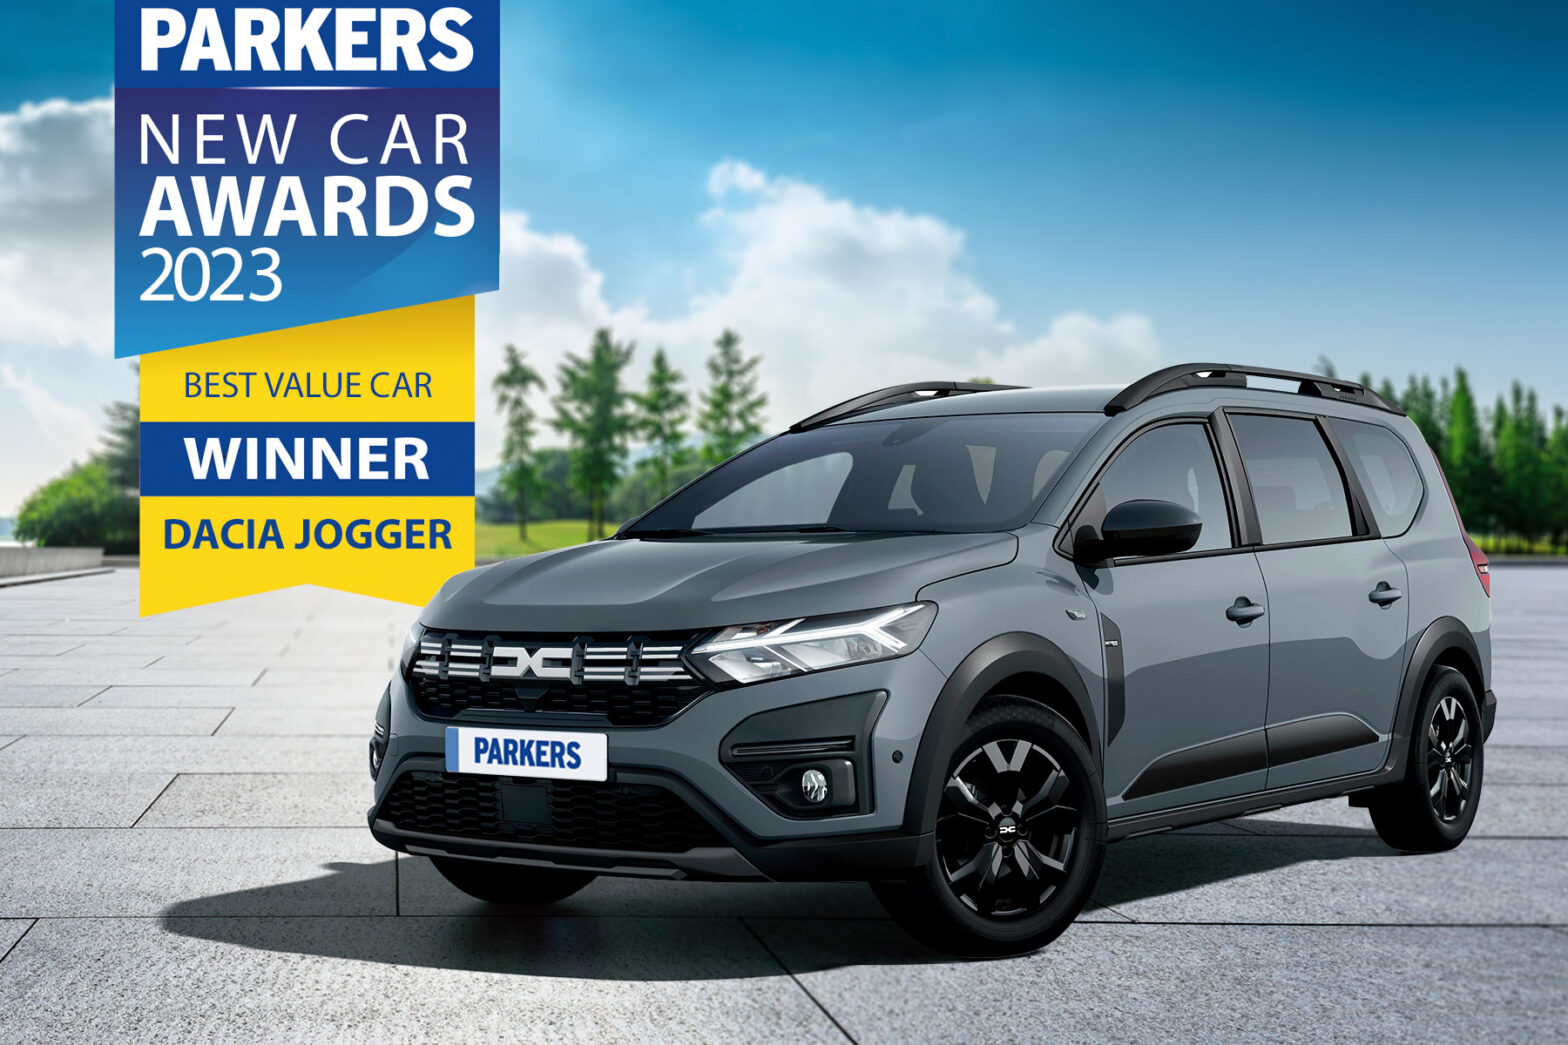 Parkers.co.uk announces New Car Award winners 2023